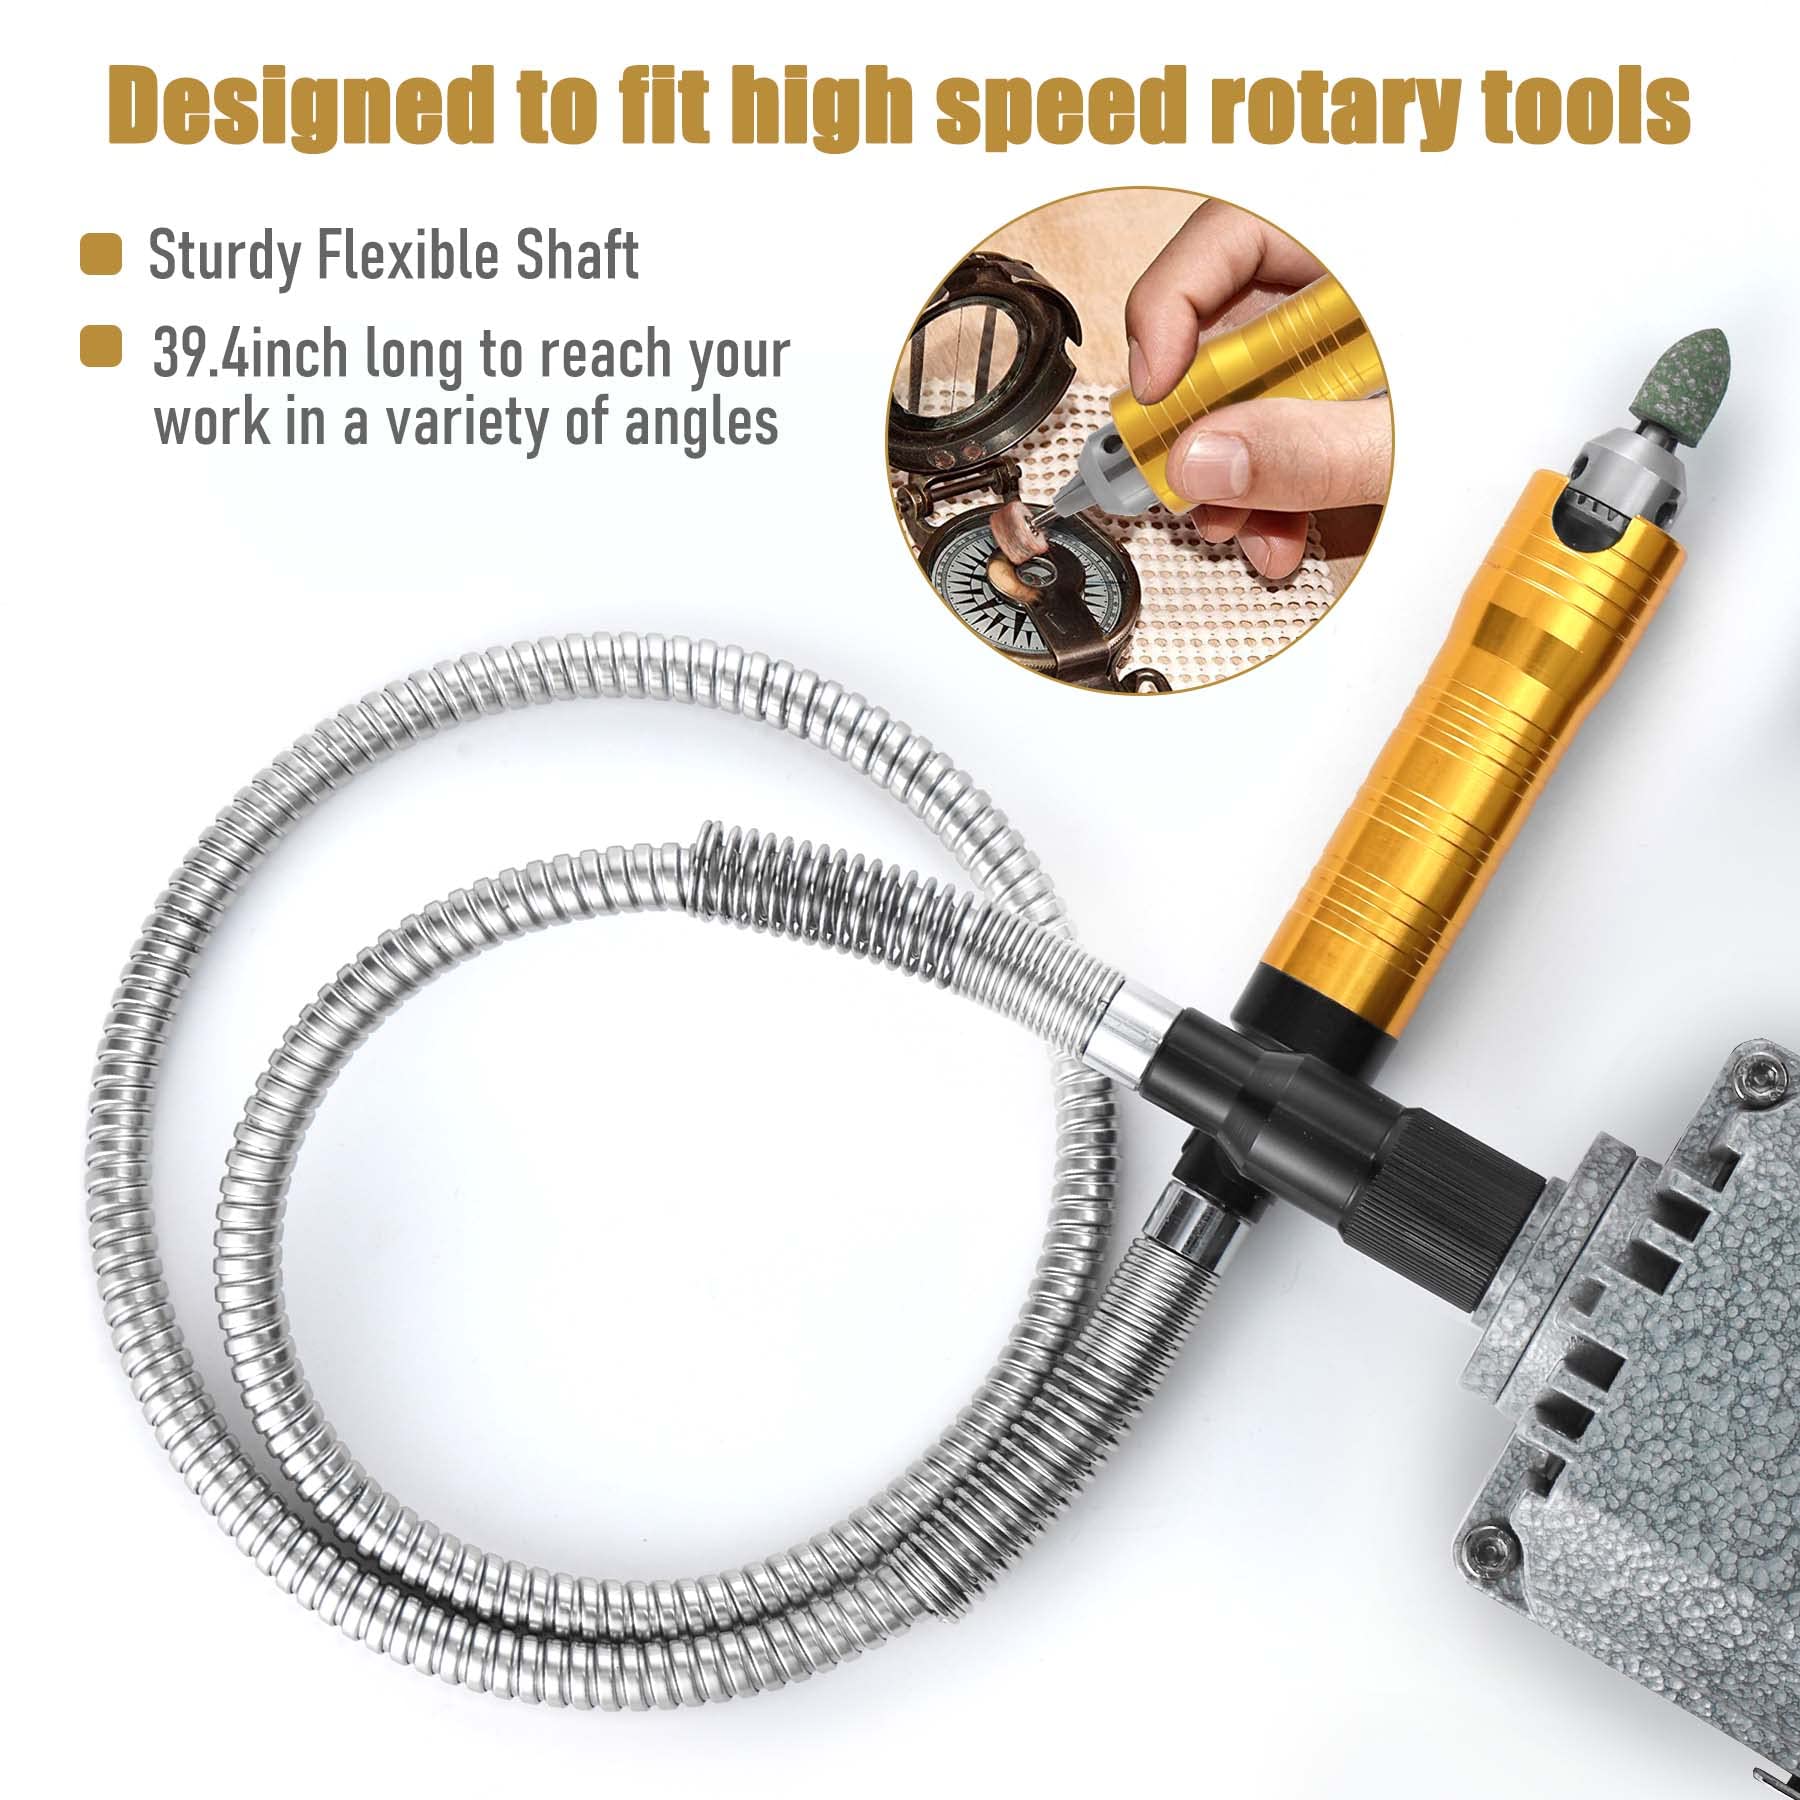 FlySkip Flex Shaft Rotary Tool 1000W 30000RPM,Flex Shaft Hanging Grinder Carver with Forward and Reverse Rotation, Multi-function Metalworking with Foot Pedal Control for Carving Buffing (1000W)